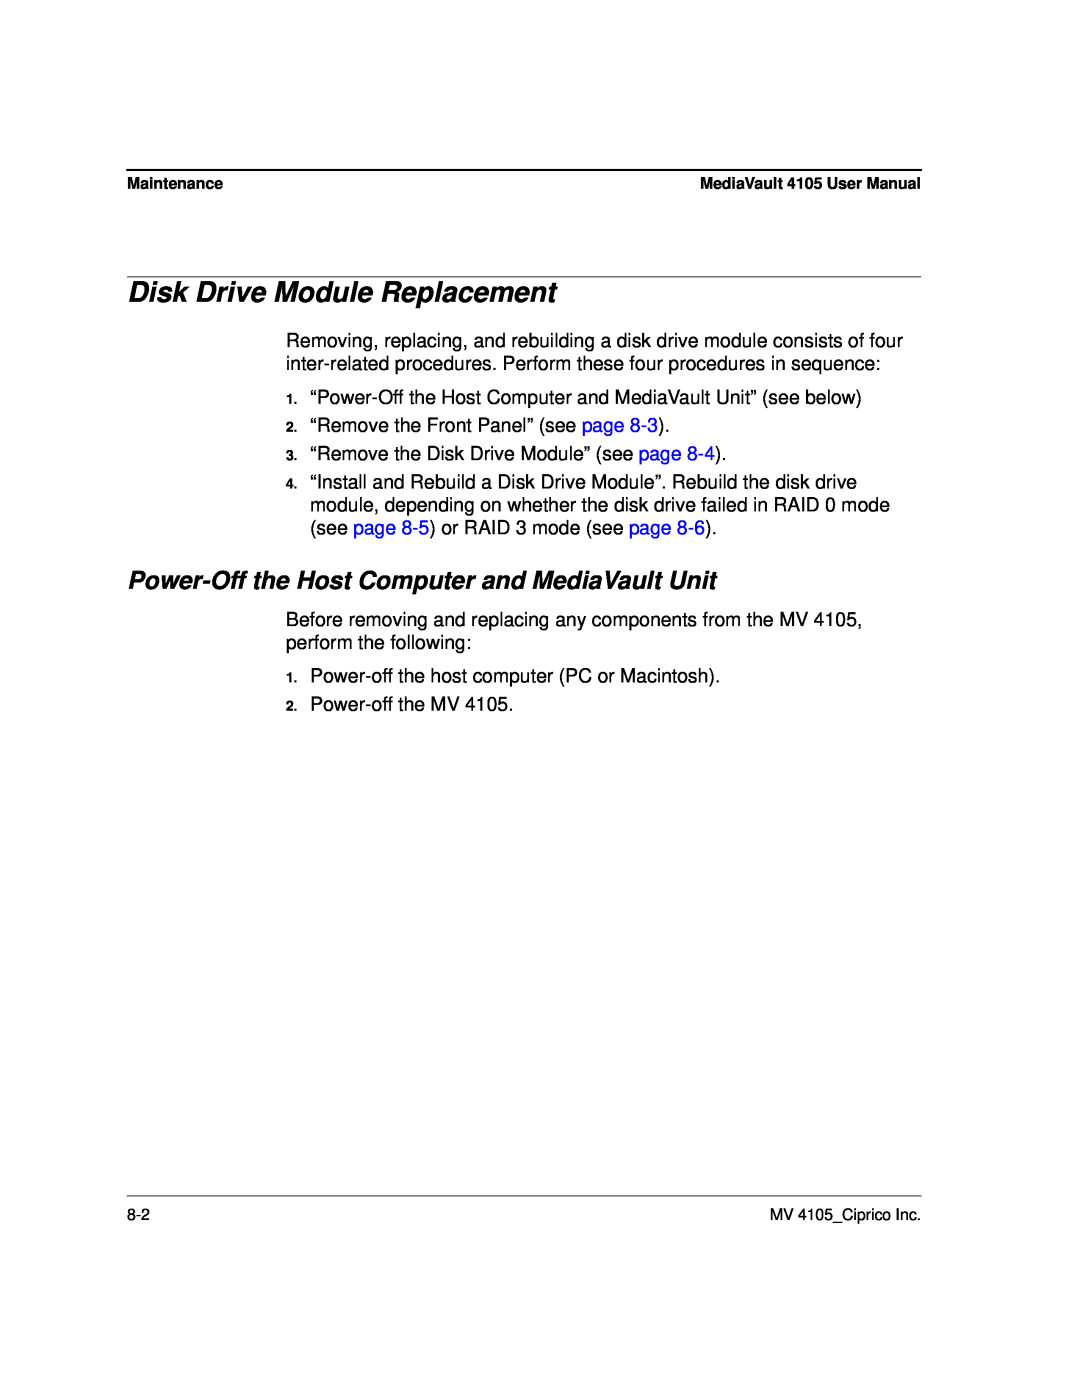 Ciprico 4105 Series user manual Disk Drive Module Replacement, Power-Off the Host Computer and MediaVault Unit 